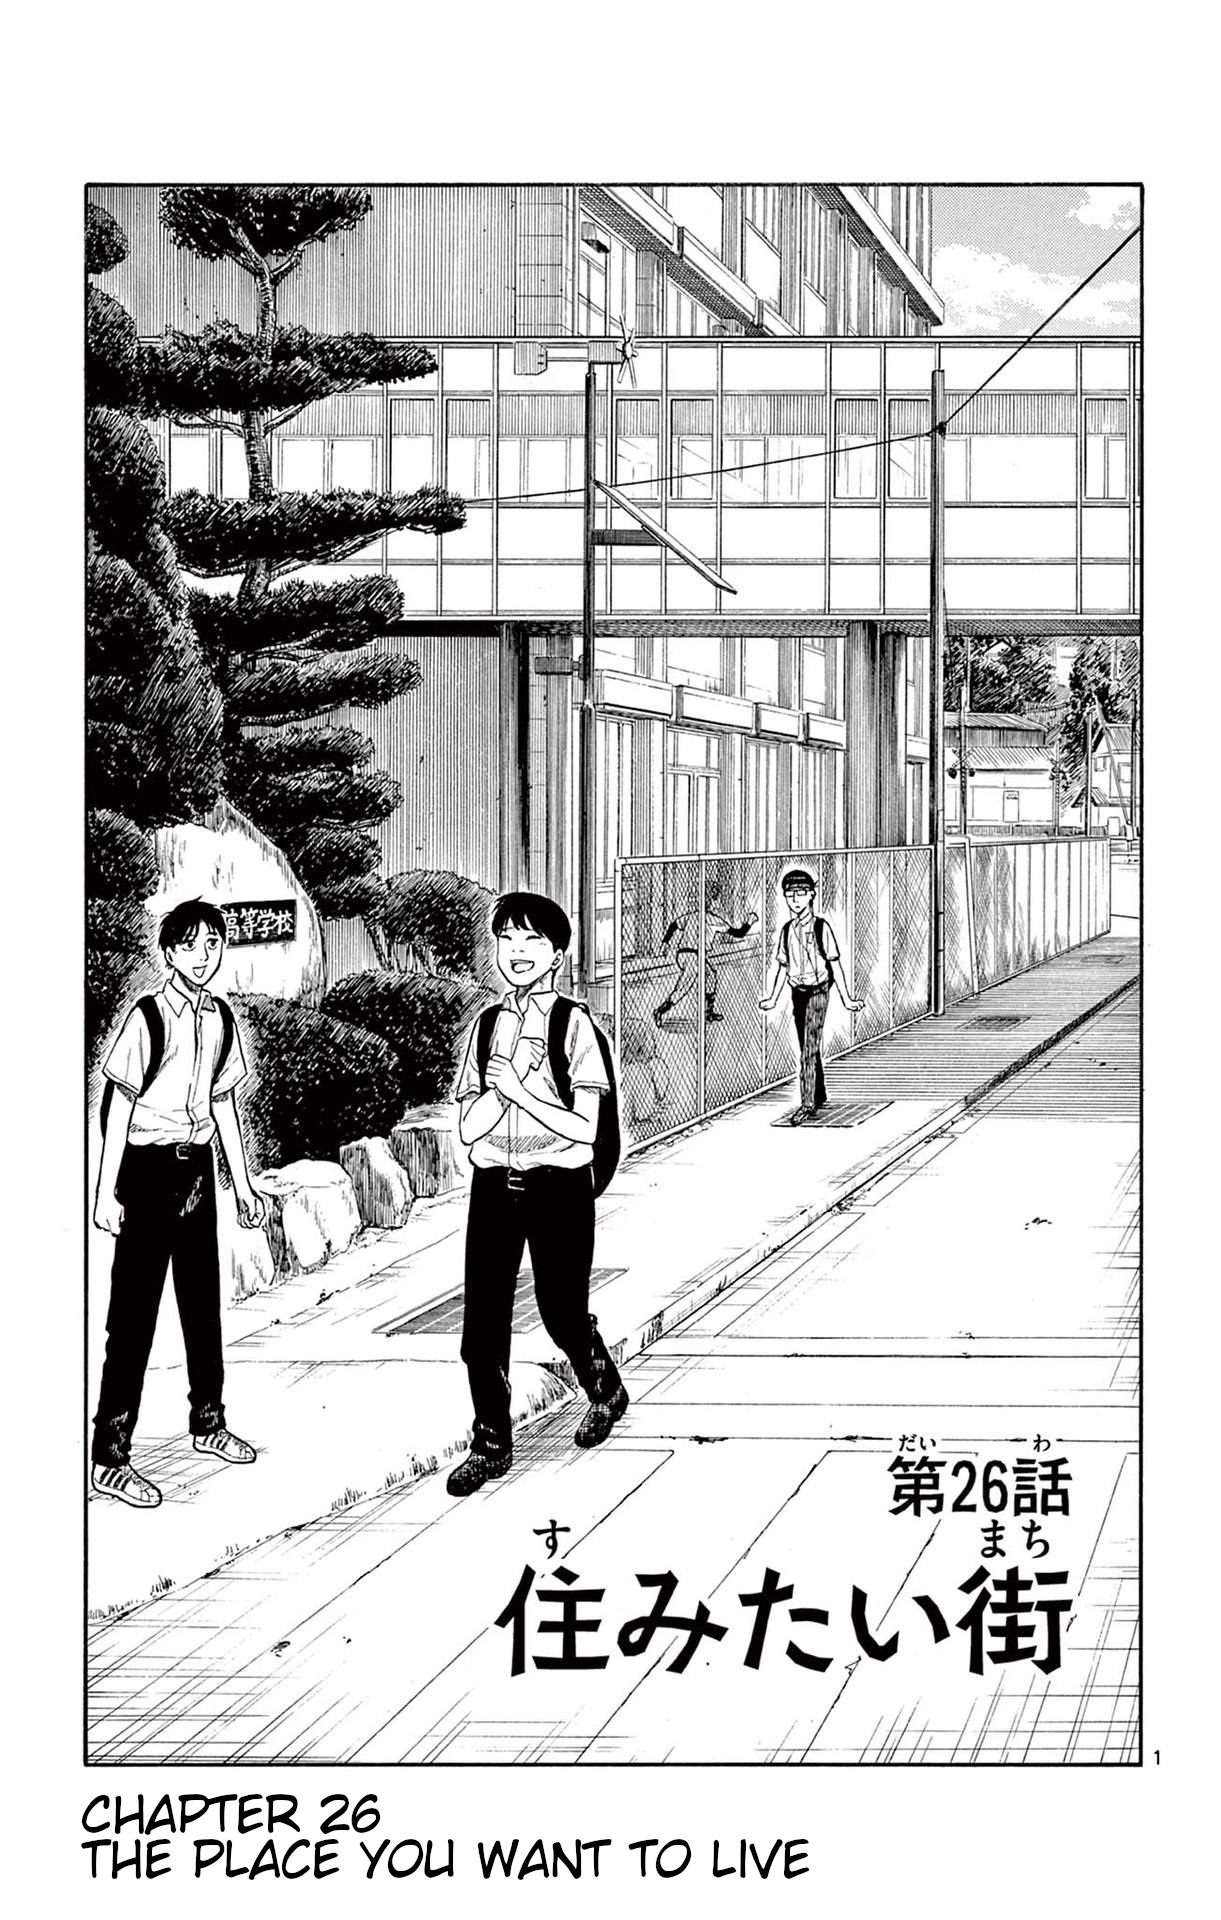 Shiroyama To Mita-San Vol.3 Chapter 26: The Place You Want To Live - Picture 1